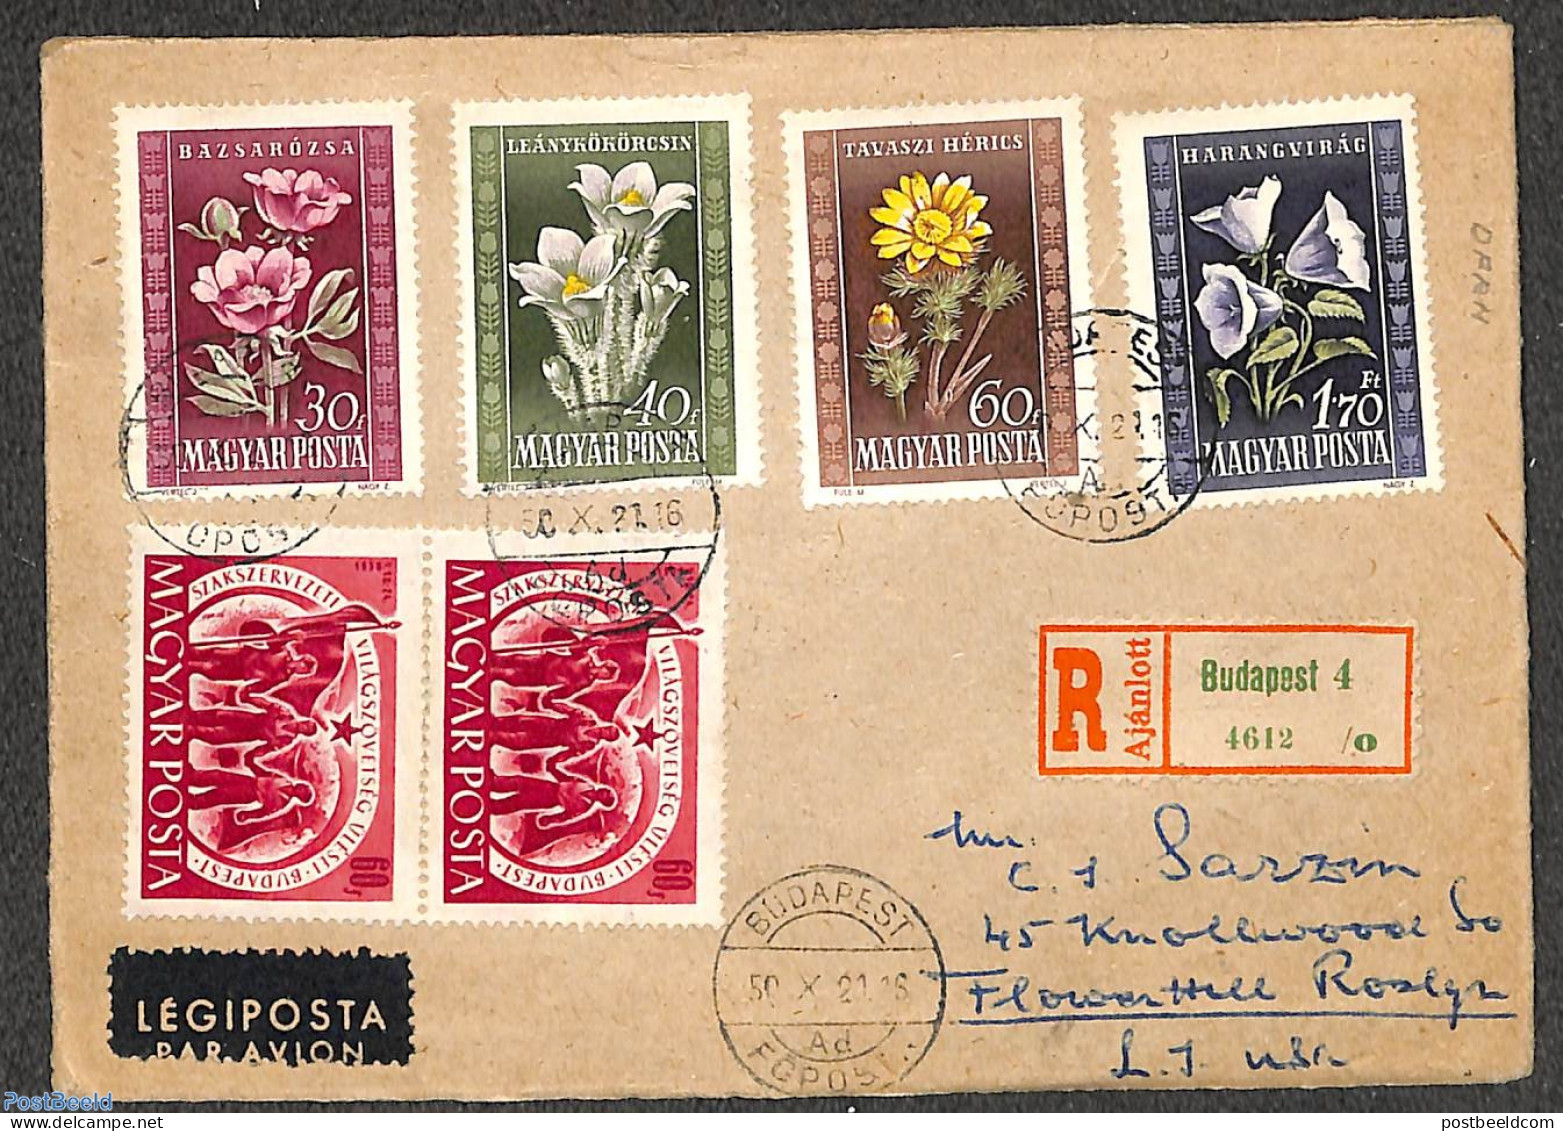 Hungary 1950 Letter To USA With Rare Imperforated UPU S/s, Postal History, U.P.U. - Covers & Documents